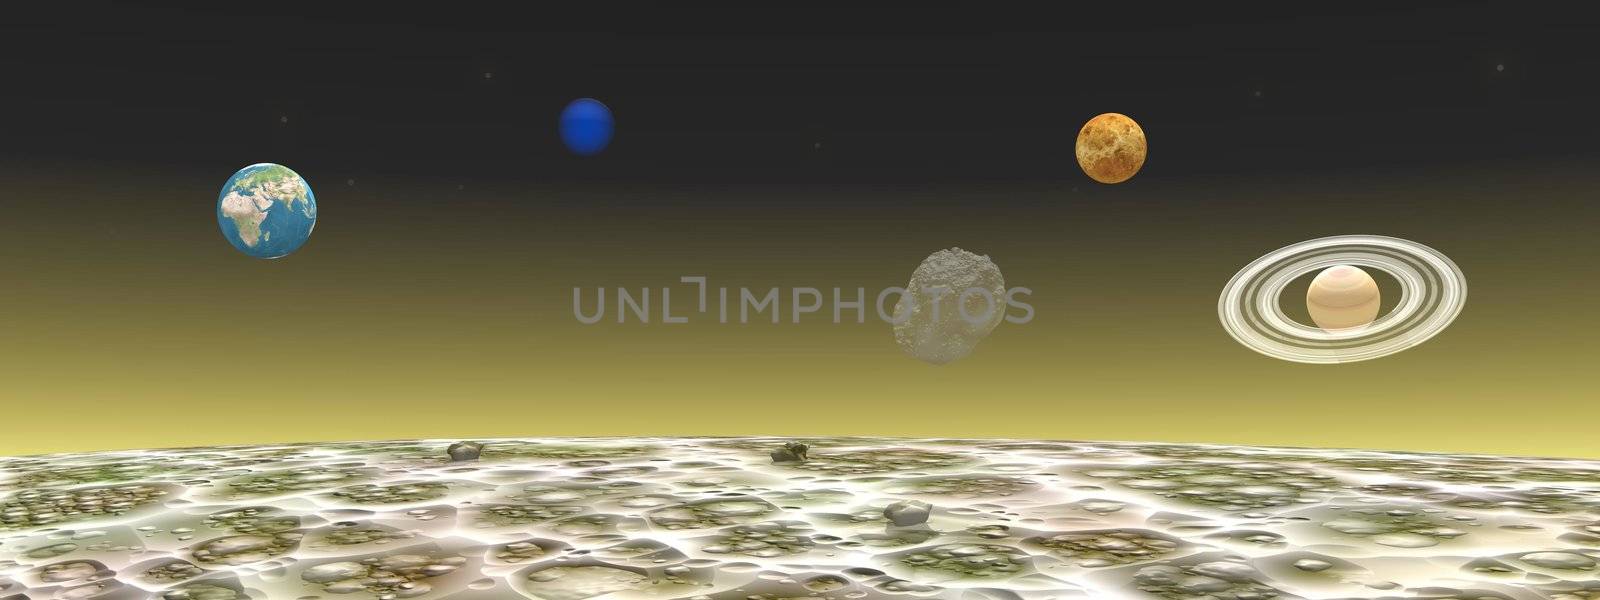 View on the universe and planets from the moon by night